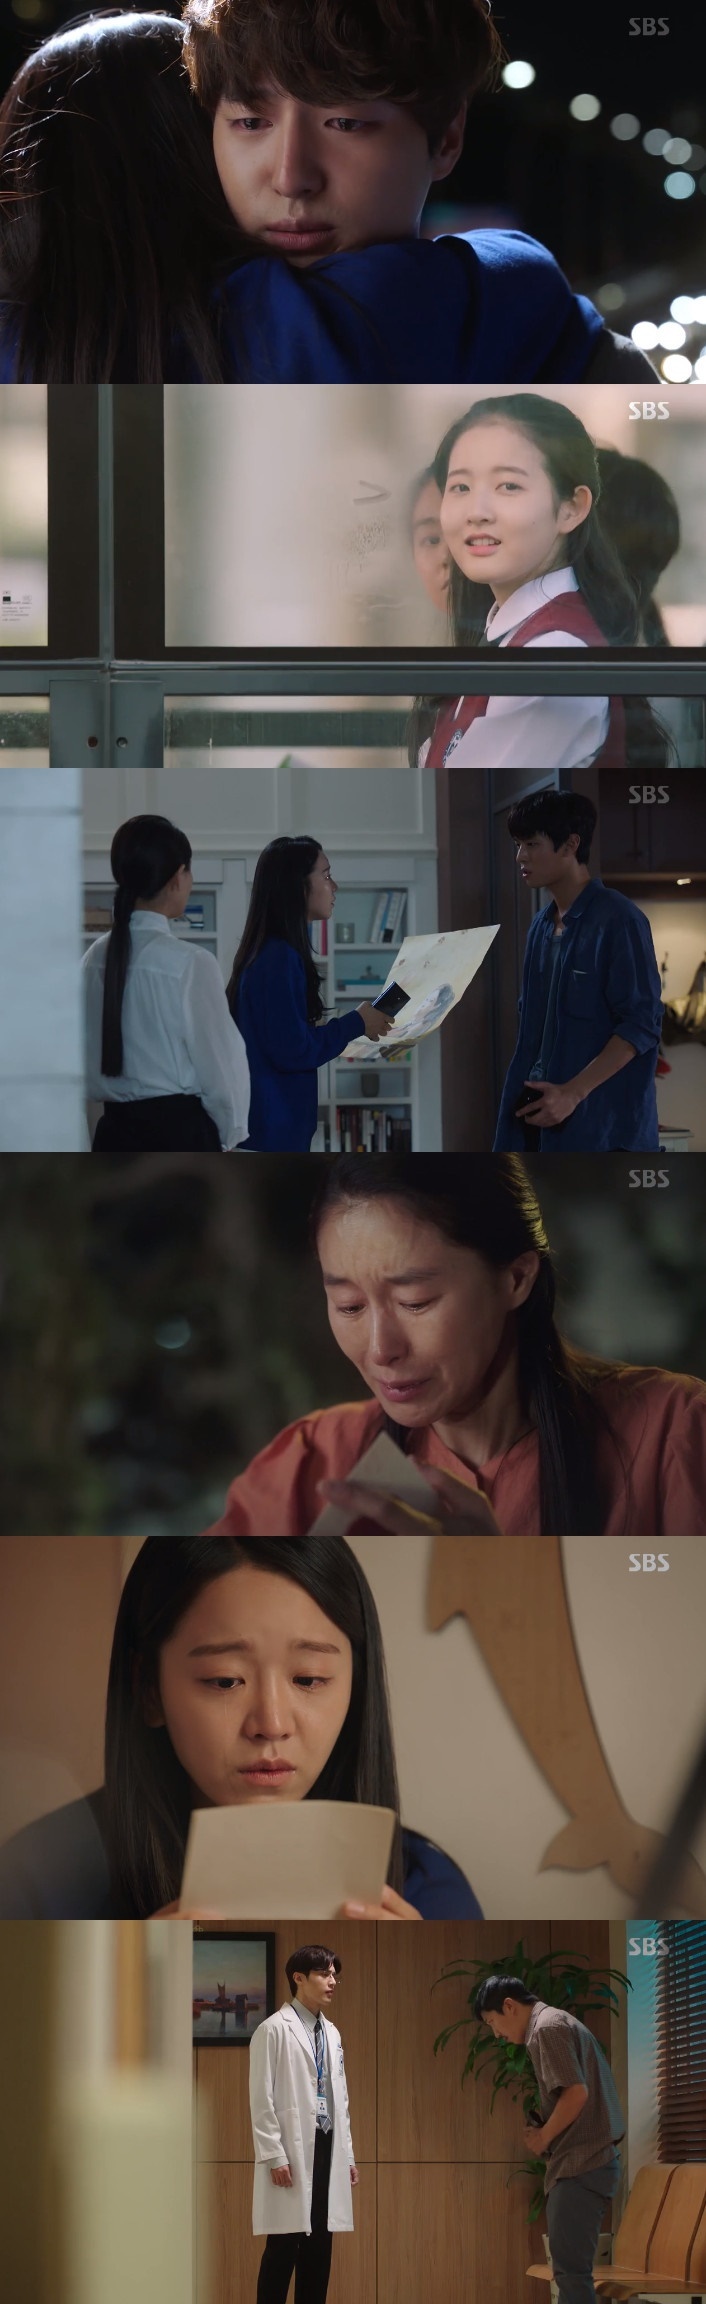 Seoul = = Thirty but seventeen Yang Se-jong and Shin Hye-sun knew they liked their opponents 13 years ago.In the SBS monthly drama Thirty but Seventeen, which aired on the 11th, Gong Woo-jin (Yang Se-jong), who blamed himself for the failure of Useris life because of himself, tried to leave without winning his own book, but changed his mind.Yuchan was worried that the weak Gong Woo-jin would close his mind again and disappear silently. Yu-chan destroyed his passport and watched in front of the room.However, the next day, as Yu Chans worries, Gong Woo-jin disappeared.On the other hand, Uthery found a picture of himself 13 years ago in the warehouse and wondered how he knew himself at that time.Utheri, who discovered a flower pot in the closet of Gong Woo-jin, recalled his memories with Gong Woo-jin, who met 13 years ago.Last night, he came to Utheri who was asleep and kissed Utheris forehead, and Utheri realized late that it was his farewell and hurried to the airport with Yuchan.However, Uthery returned to The Way Home after being contacted by Jenifer that Gong Woo-jin left a letter.In the letter, Gong Woo-jin apologized for the accident that he had ruined his 13-year life because of himself on the day of the accident, starting from his favorite Wu-Suri, which he had seen 13 years ago.However, Gong Woo-jin, who thought he had left, decided to stay with Utheri. He continued to think about whether he would run away or not.I wouldnt have loved you in the first place if I knew it was my fault. I cant leave you now.I want to protect you until you are truly happy. On the other hand, on the same day, Usuri also revealed that he liked Gong Woo-jin 13 years ago, and it was revealed that the two people liked it from the past.